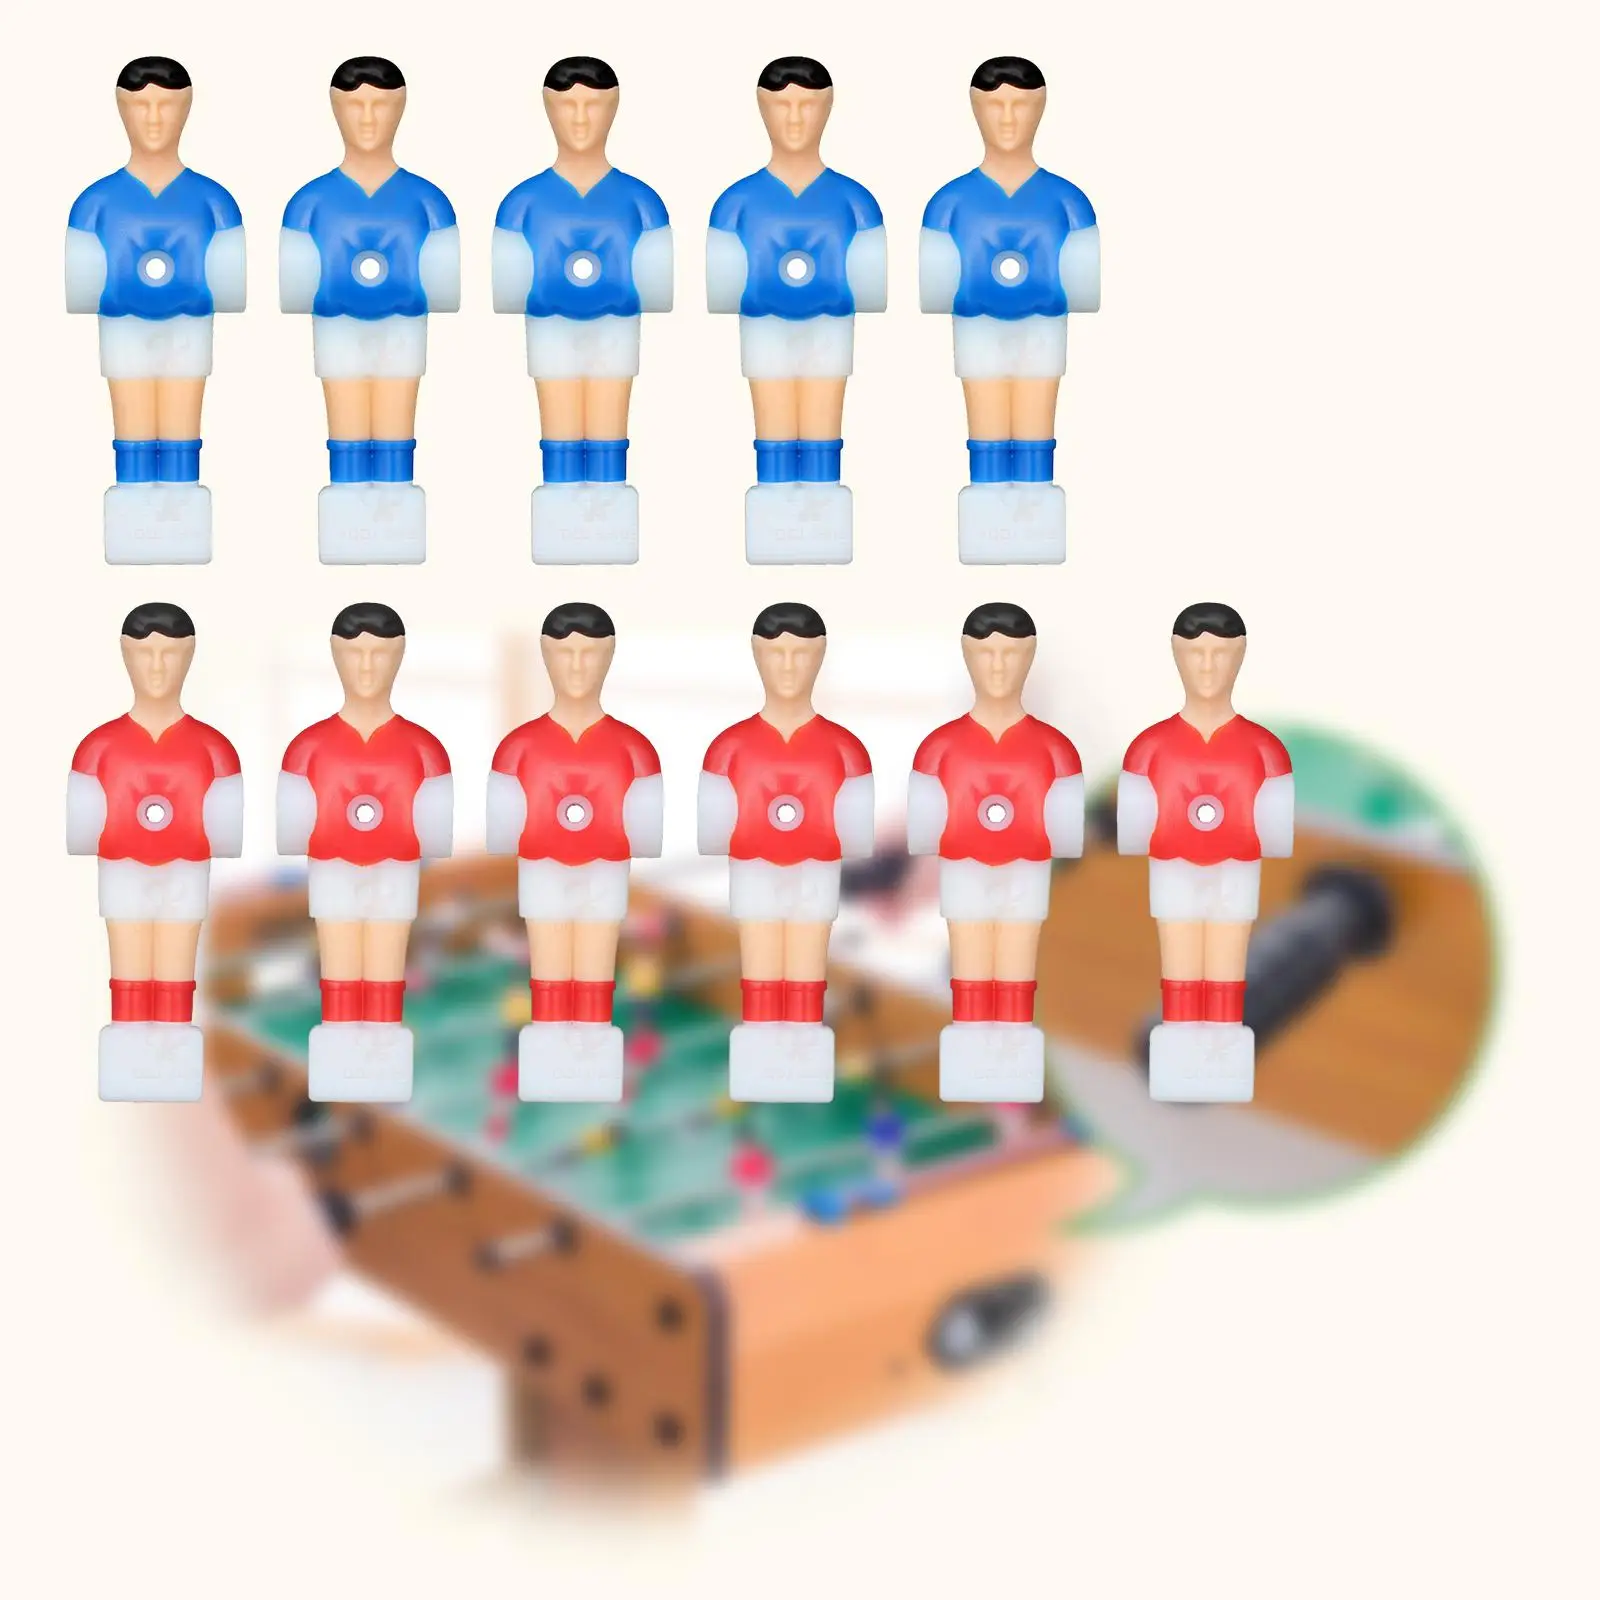 11Pcs Foosball Men Replacement Foosball Soccer Table Football Men Foosball Player Soccer Games Red and Blue for Home Game Room